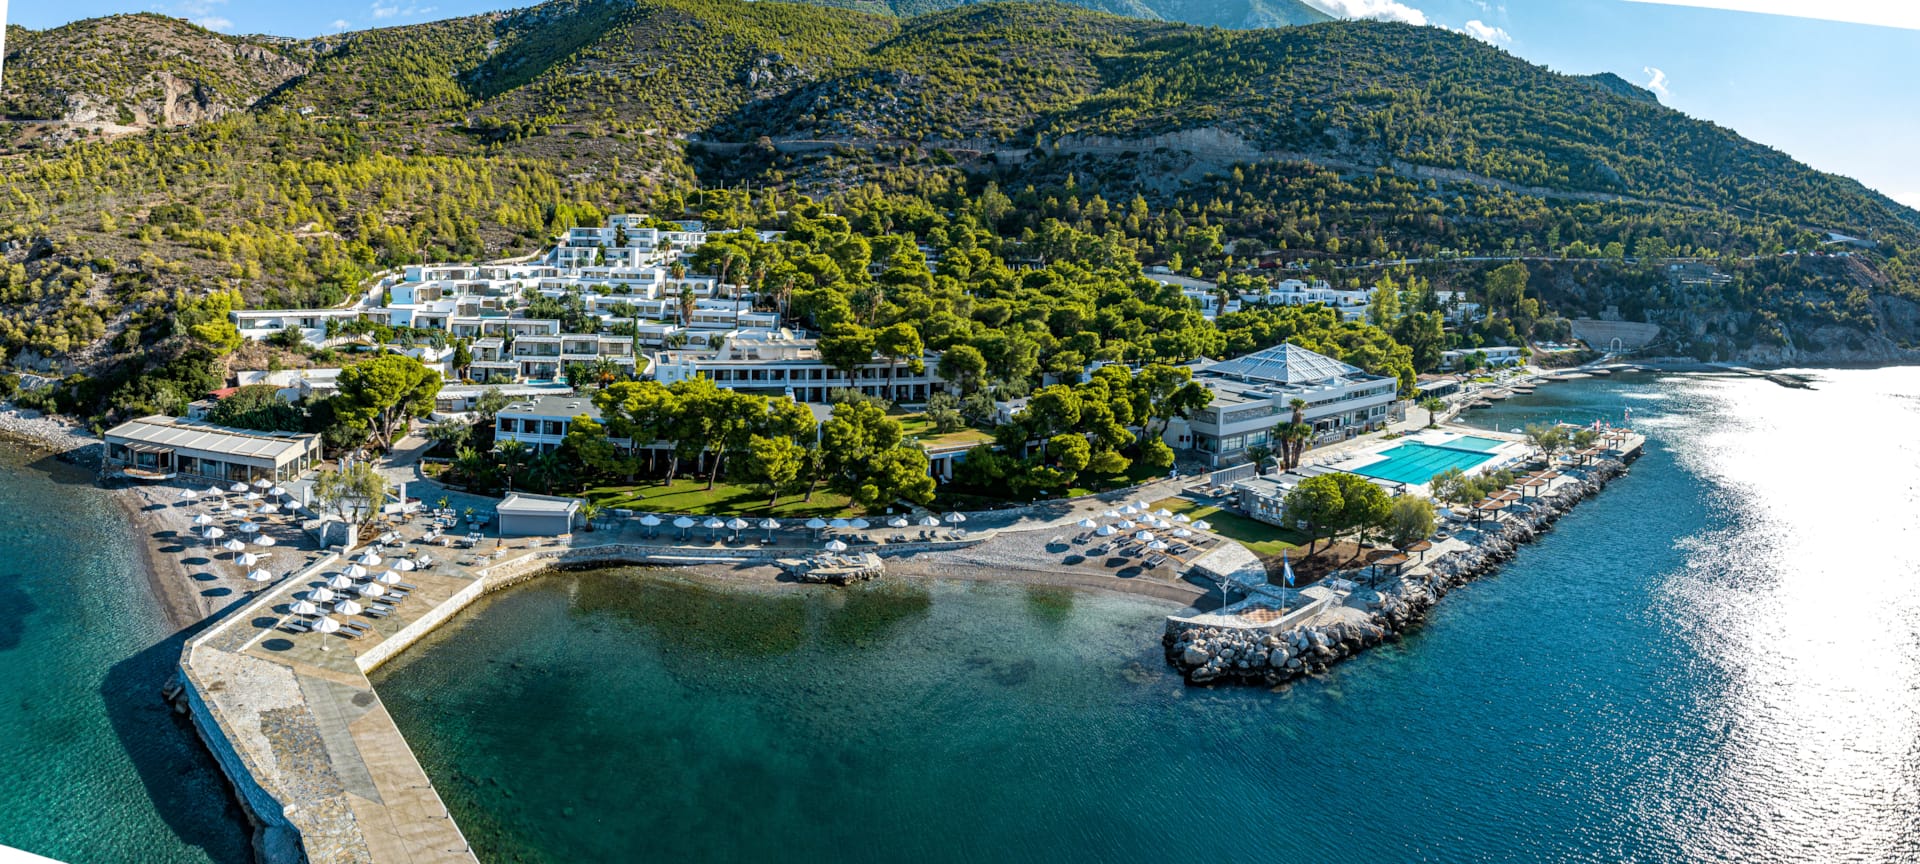 Wyndham Hotels & Resorts Expands Footprint in Greece